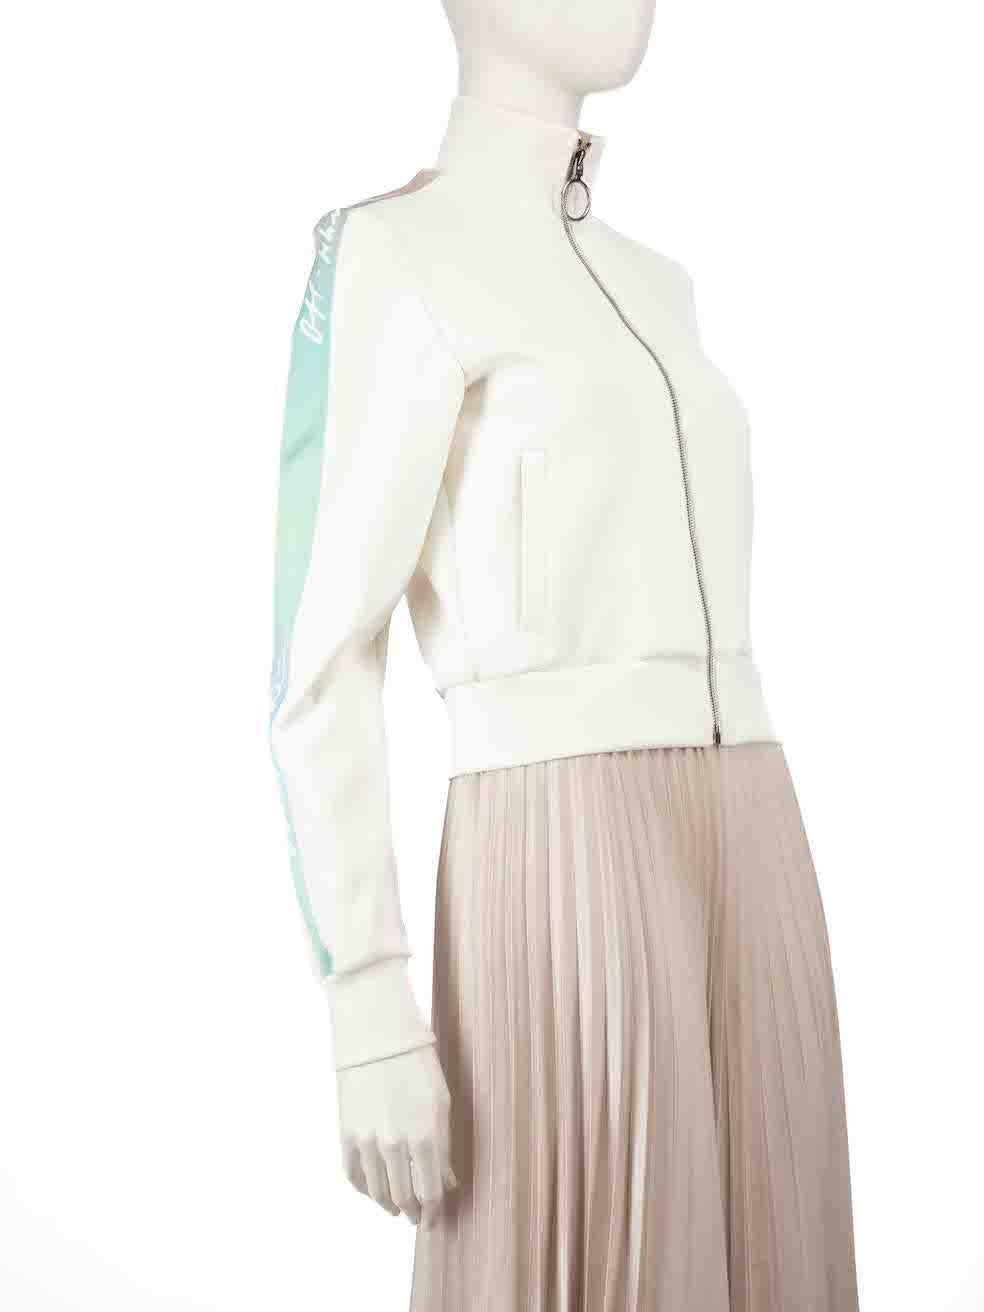 CONDITION is Very good. Minimal wear to the jacket is evident. Minimal wear to the left arm brand detailing is seen with a pull to the weave on this used Off-White designer resale item.
 
 
 
 Details
 
 
 White
 
 Synthetic
 
 Track jacket
 
 Mock